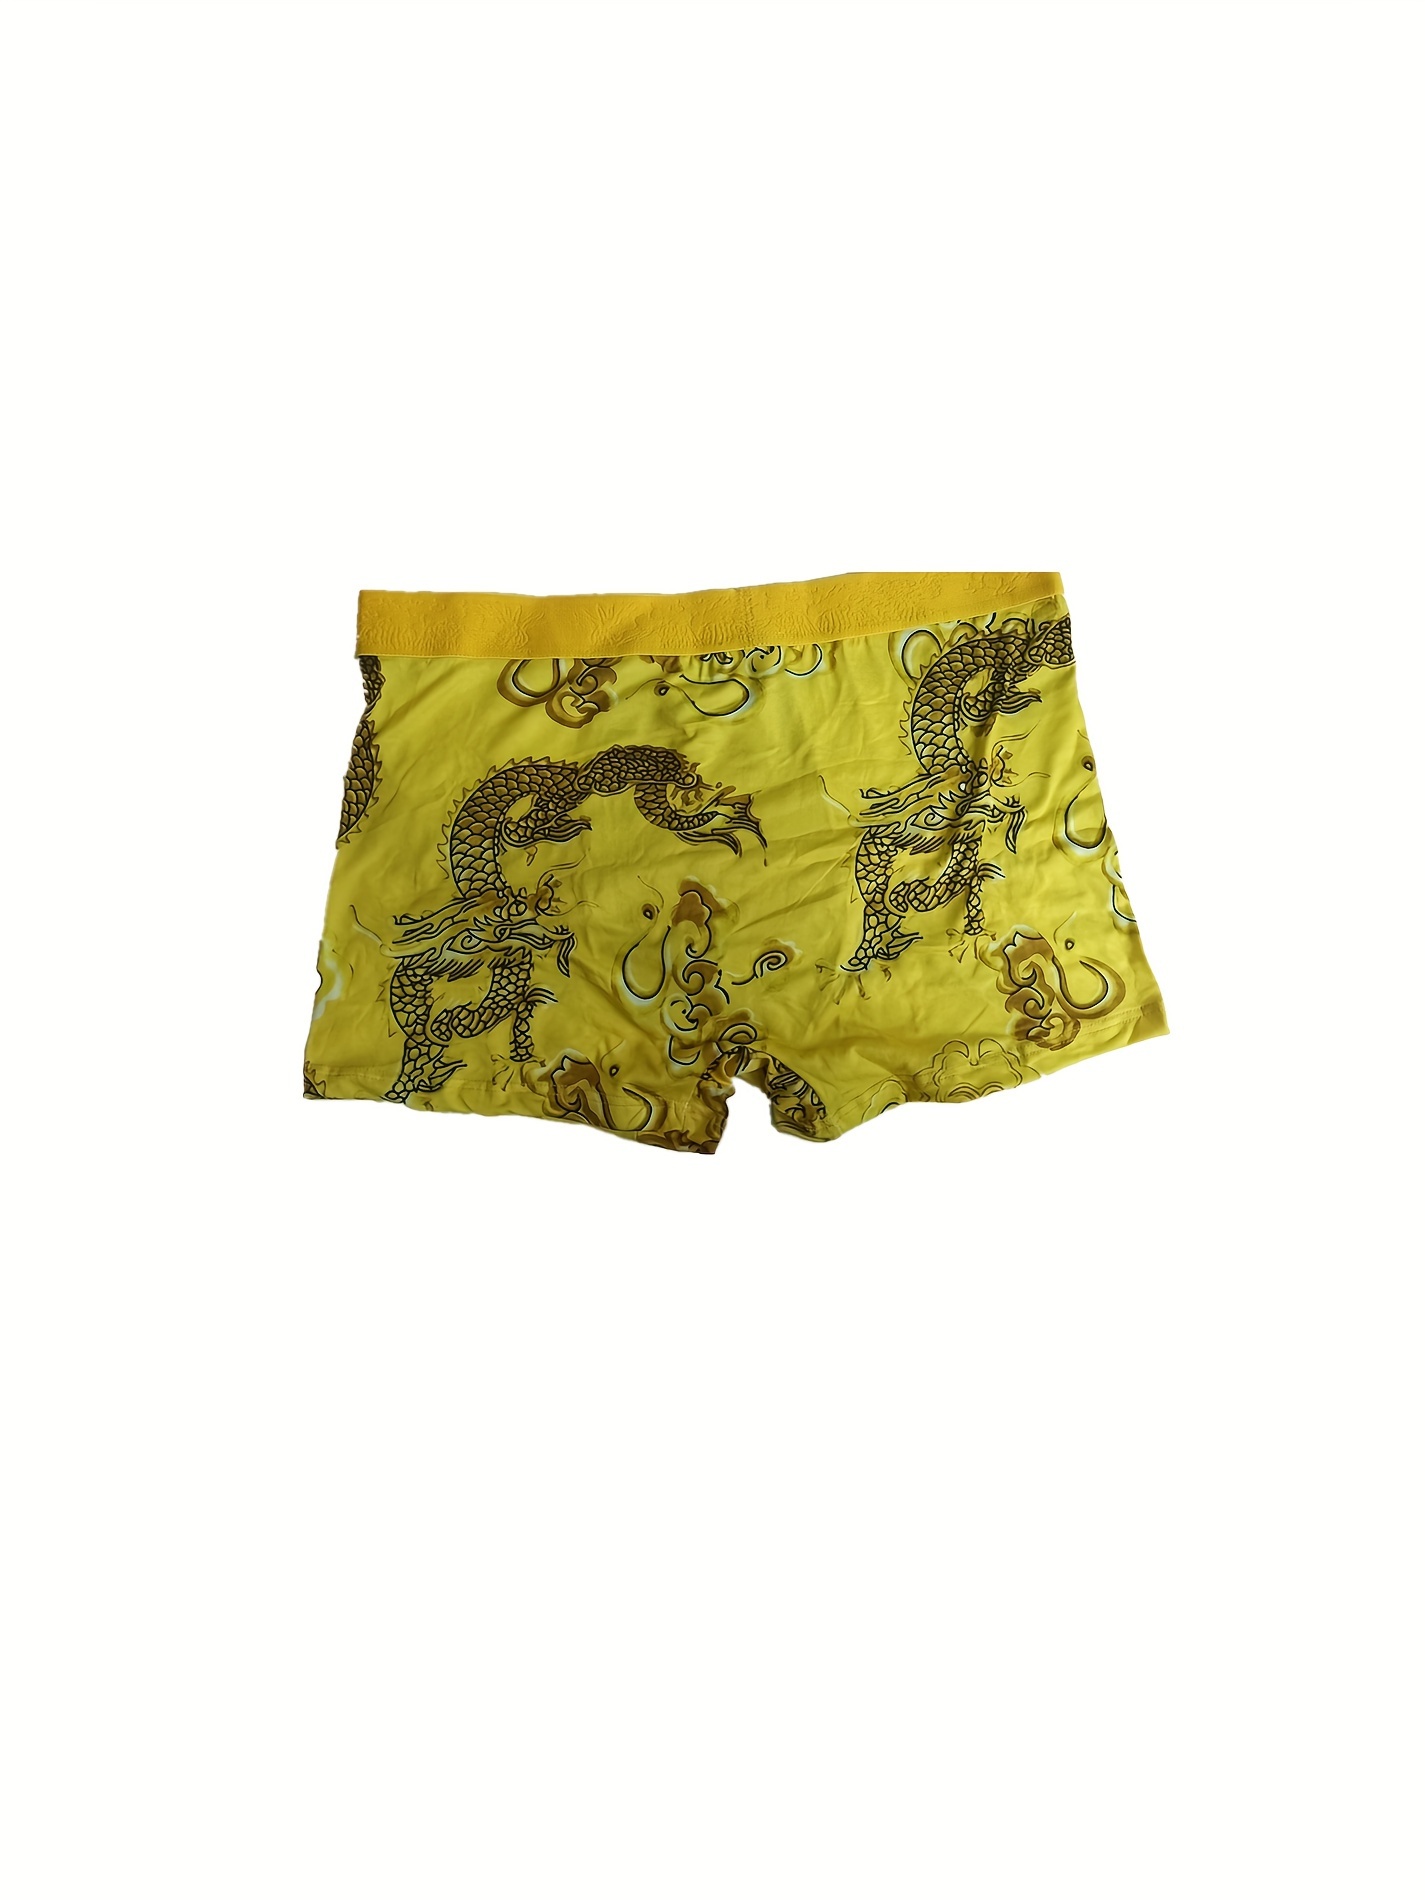 Aobiono Chinese New Year Men Red Underwear Boxer Briefs FA CAI Lucky  Panties Spring Festival Trunks Shorts Birth Animal Year